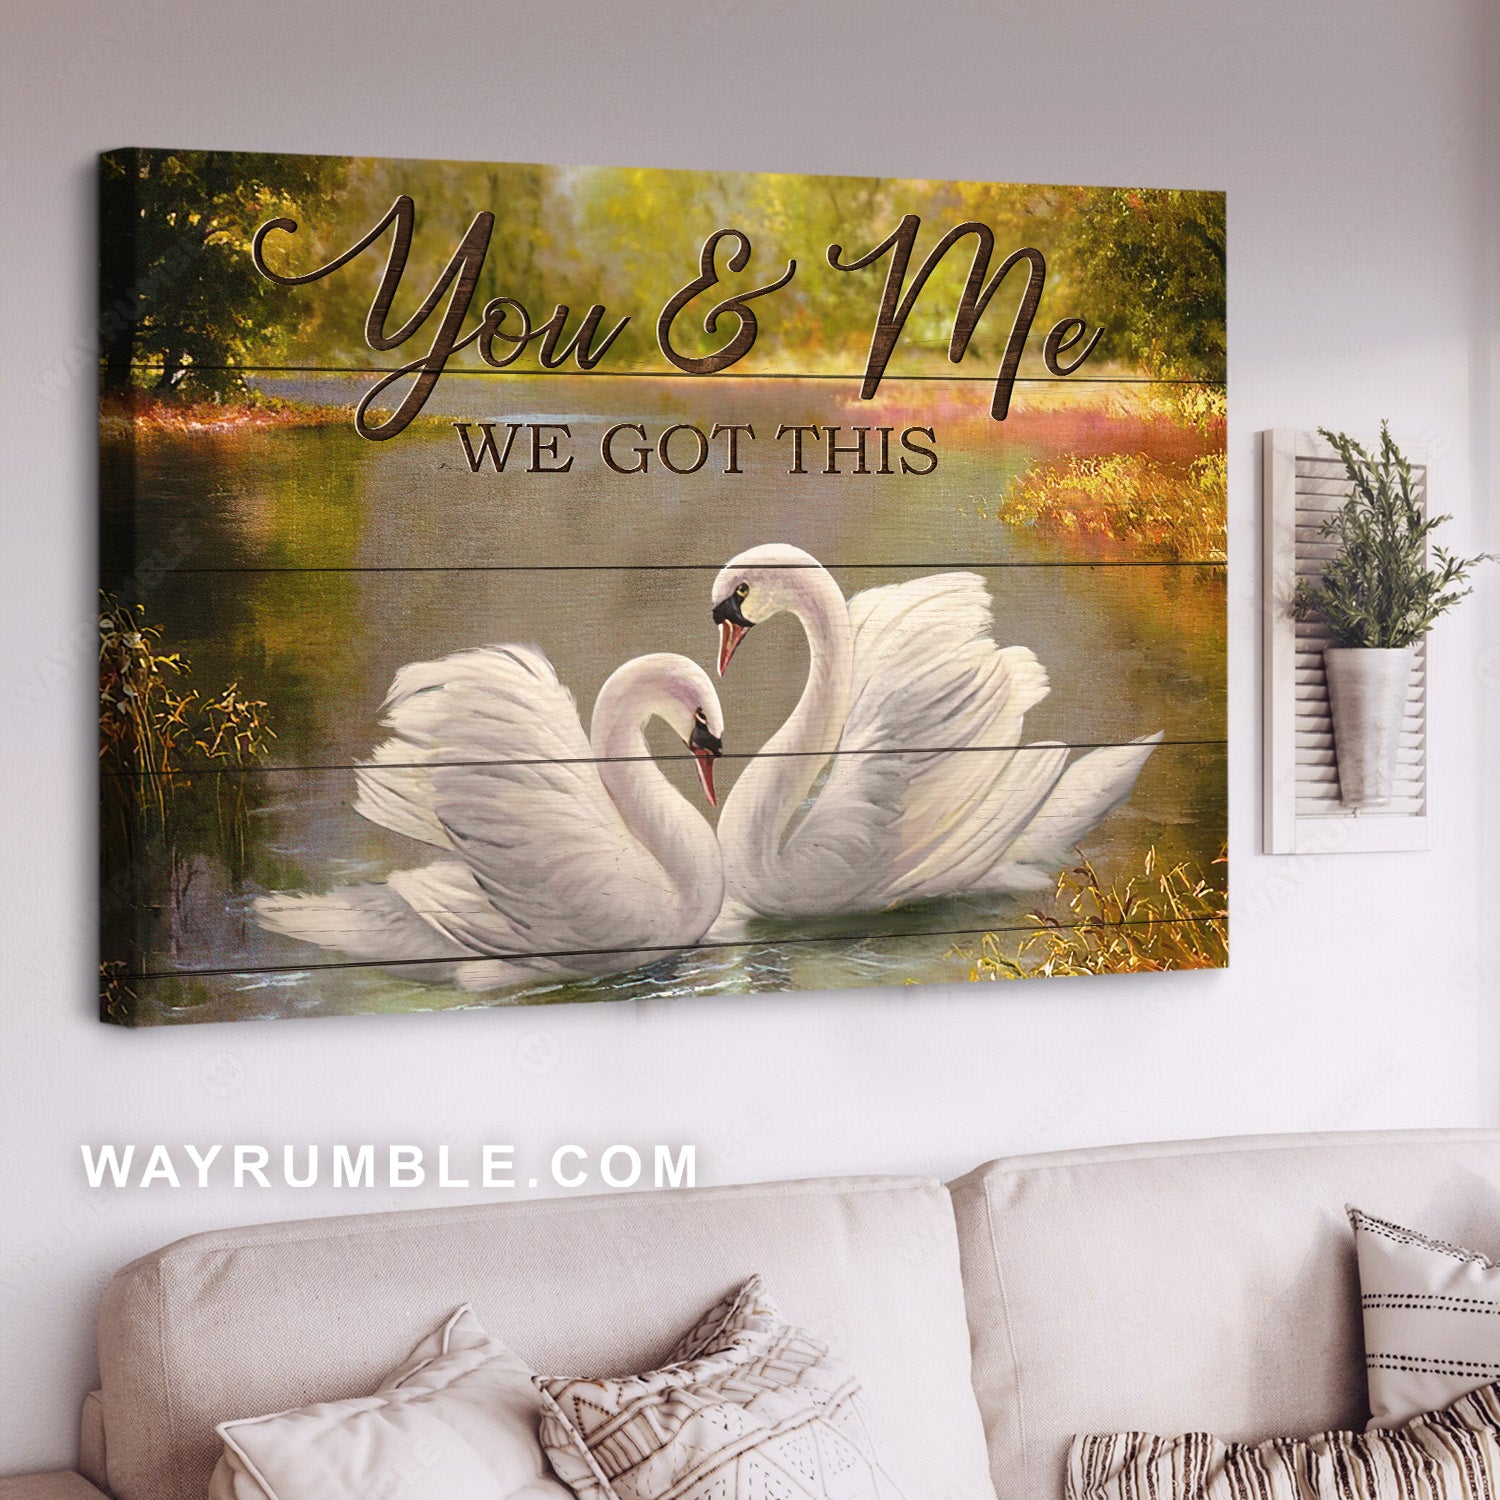 Swan couple, Pretty lake, You and me, We got this - Couple Landscape Canvas Prints, Home Decor Wall Art